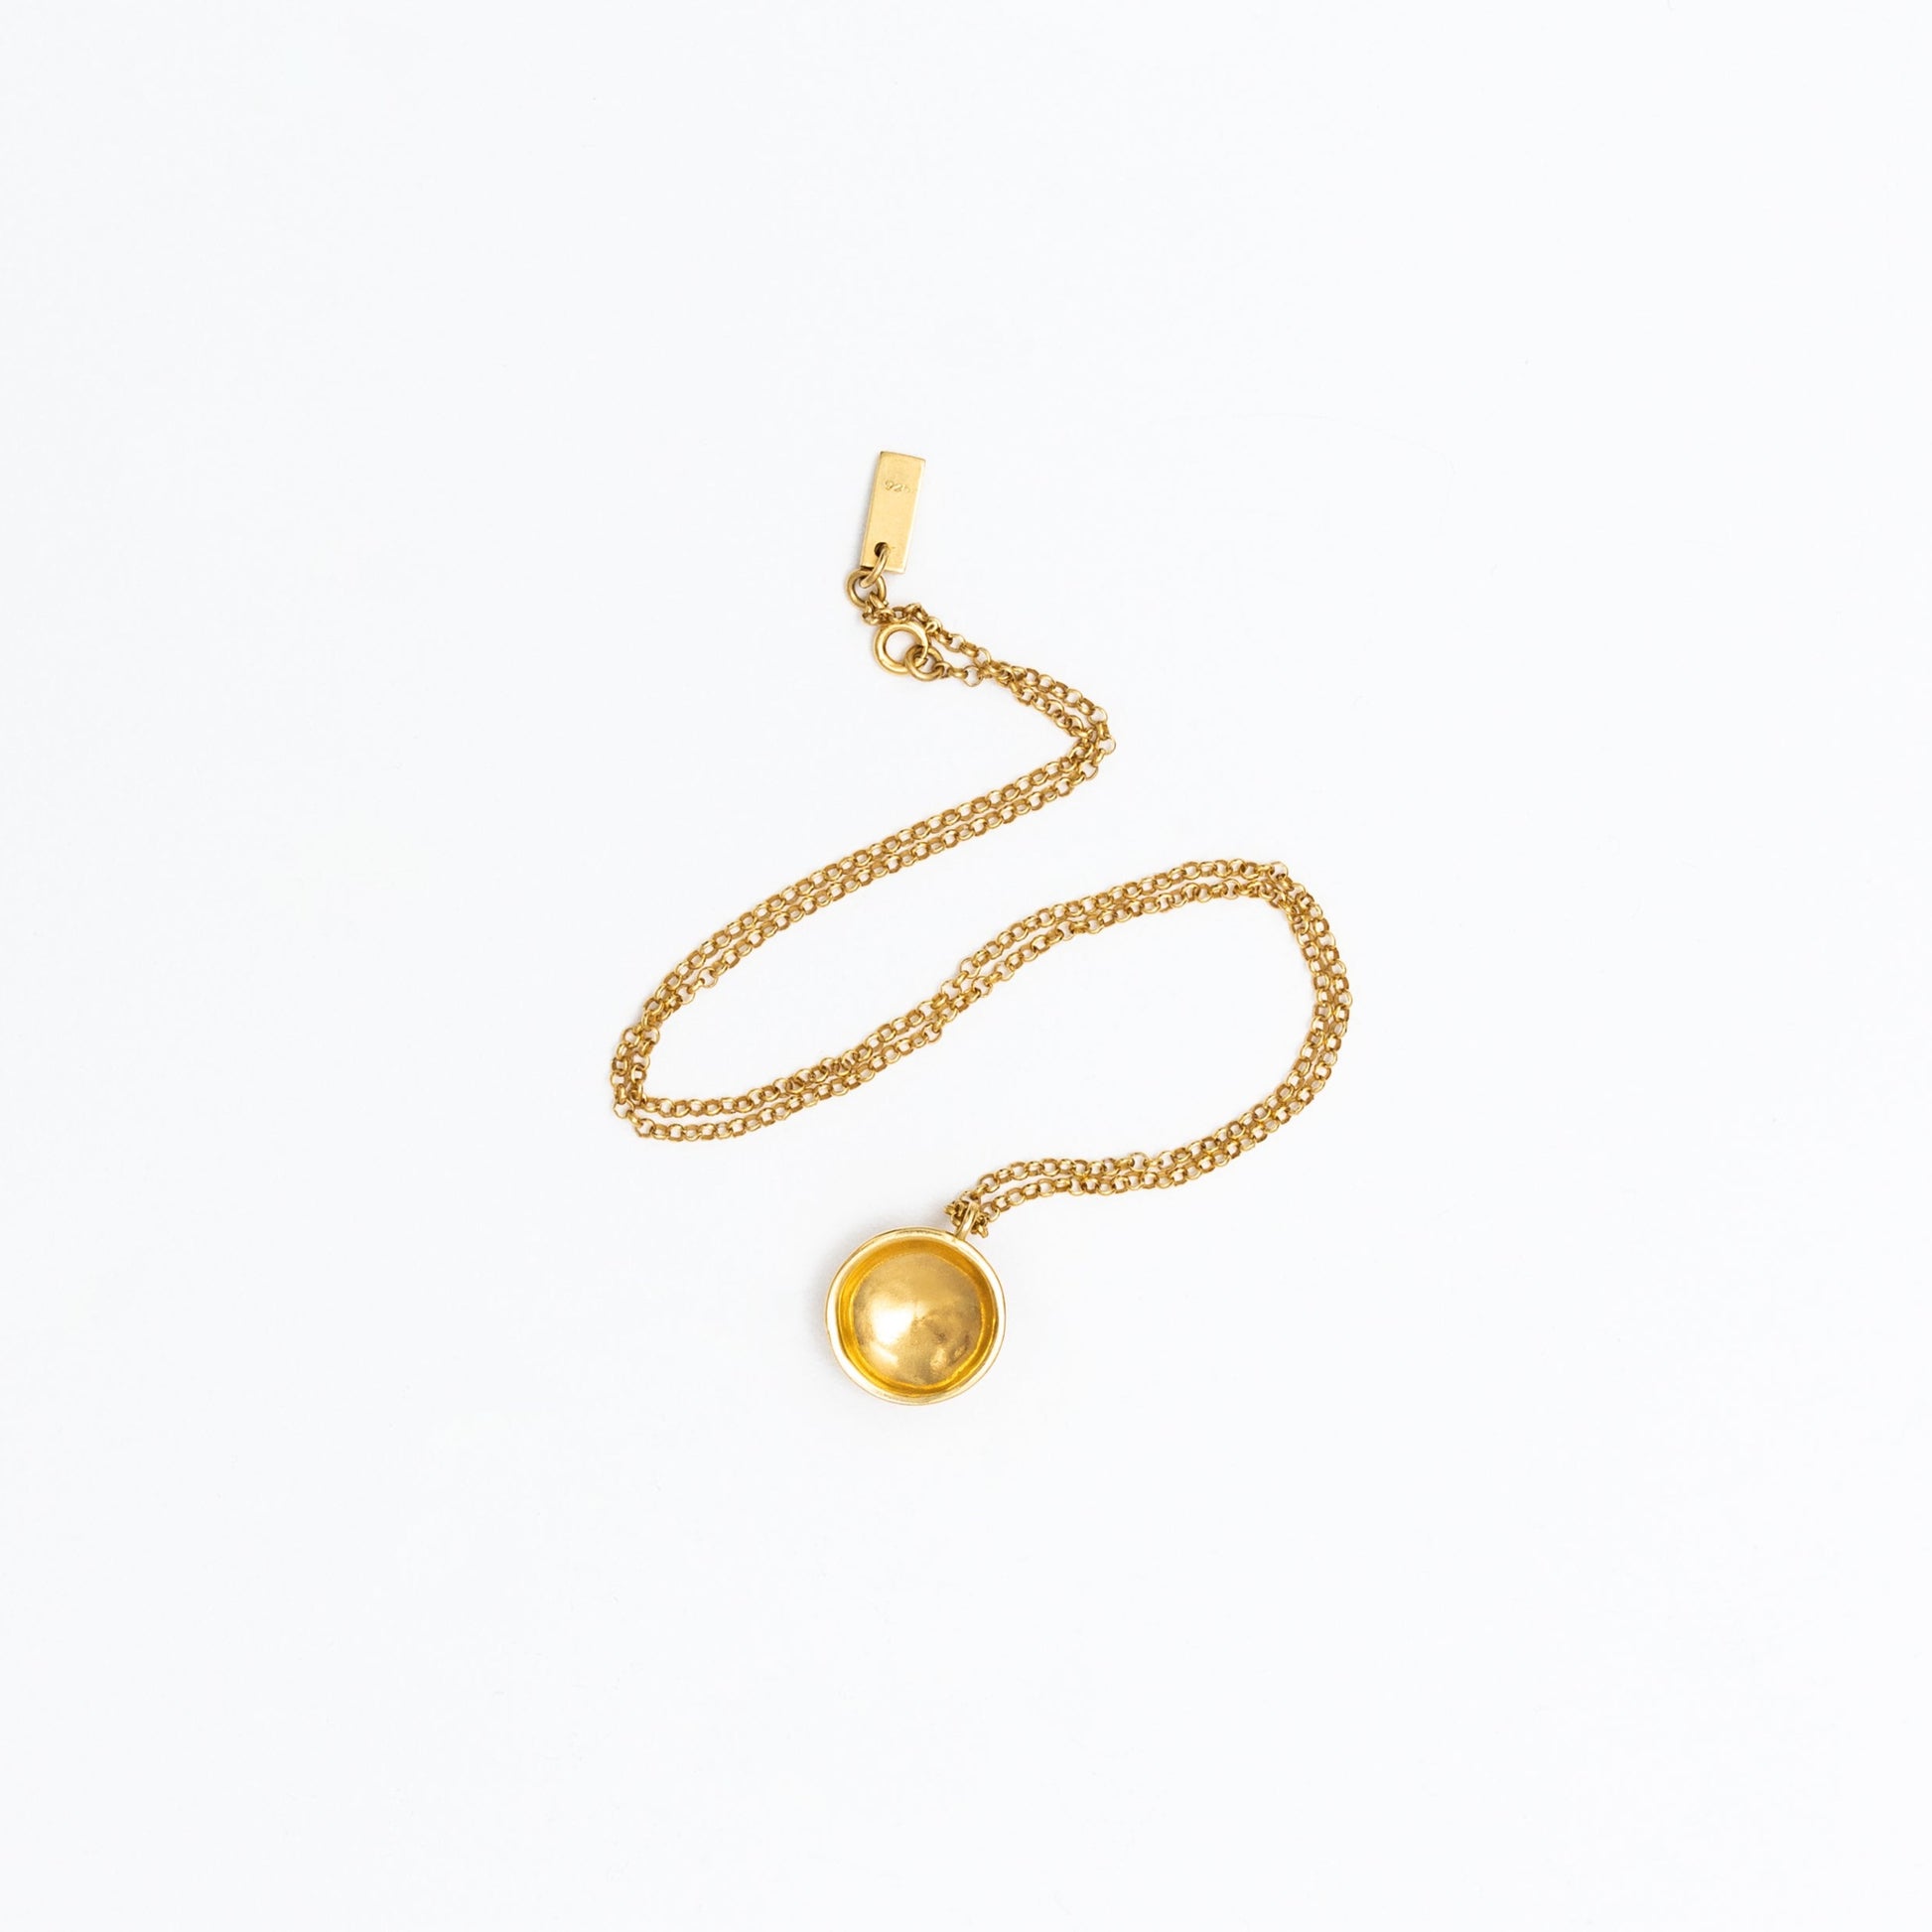 Gold pendant with chain